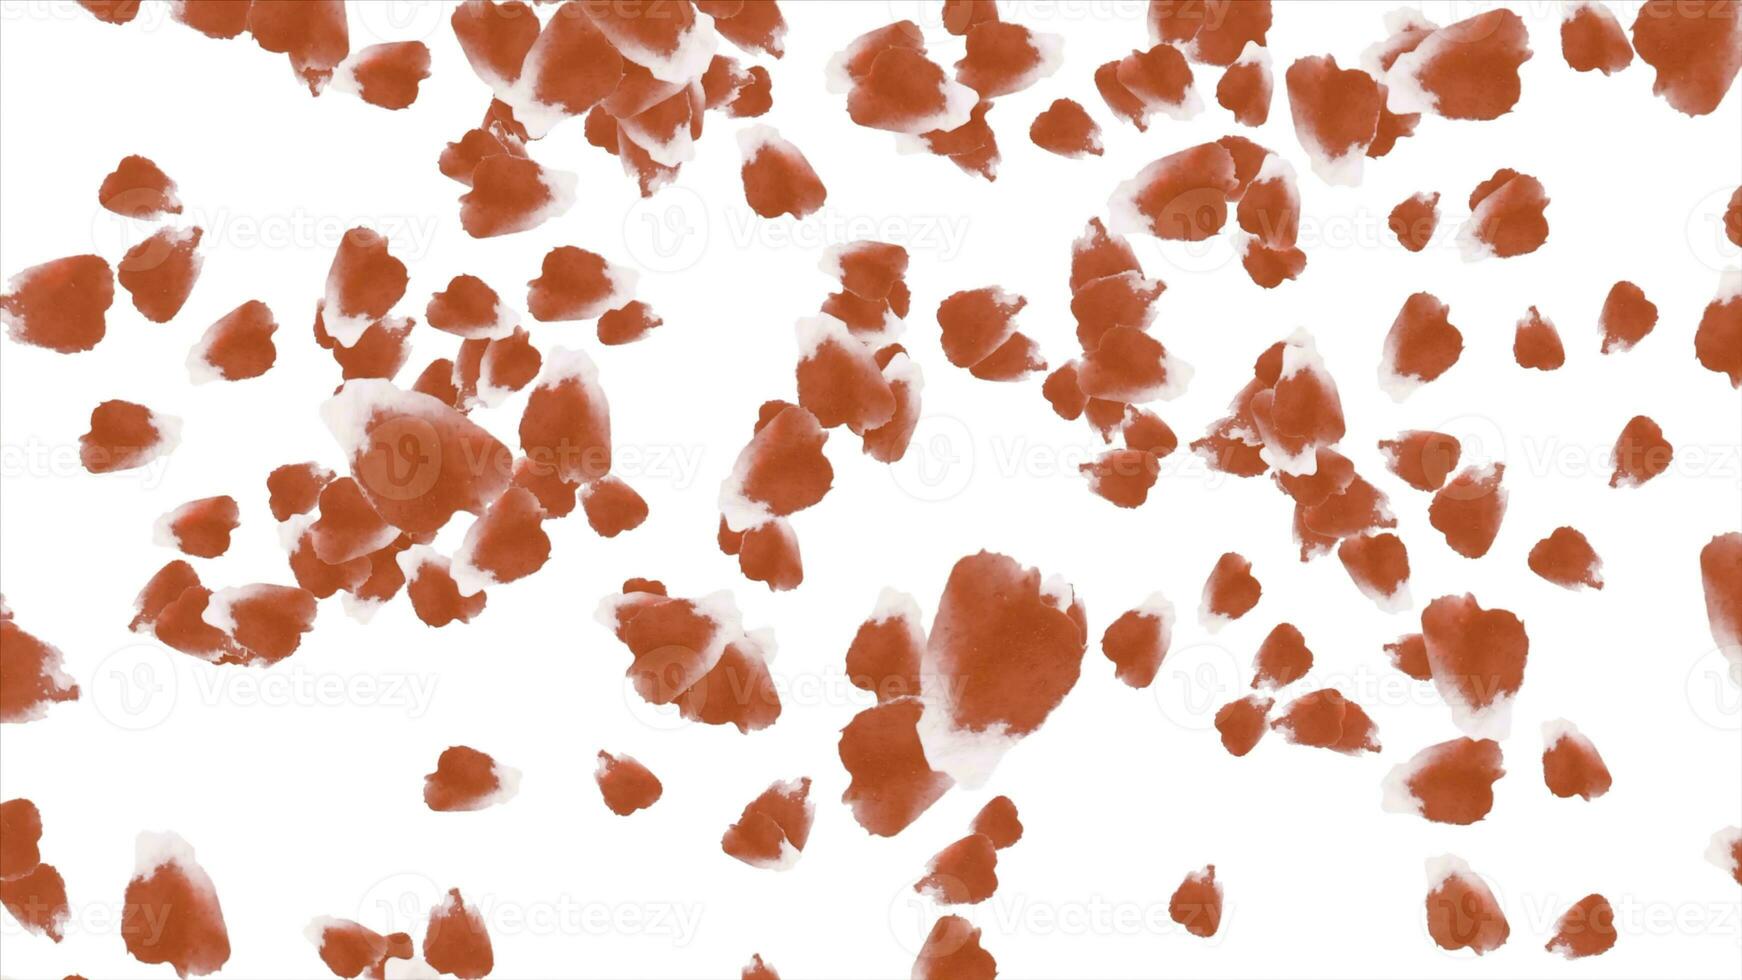 Falling petals roses animation on white background. Falling rose petals photo